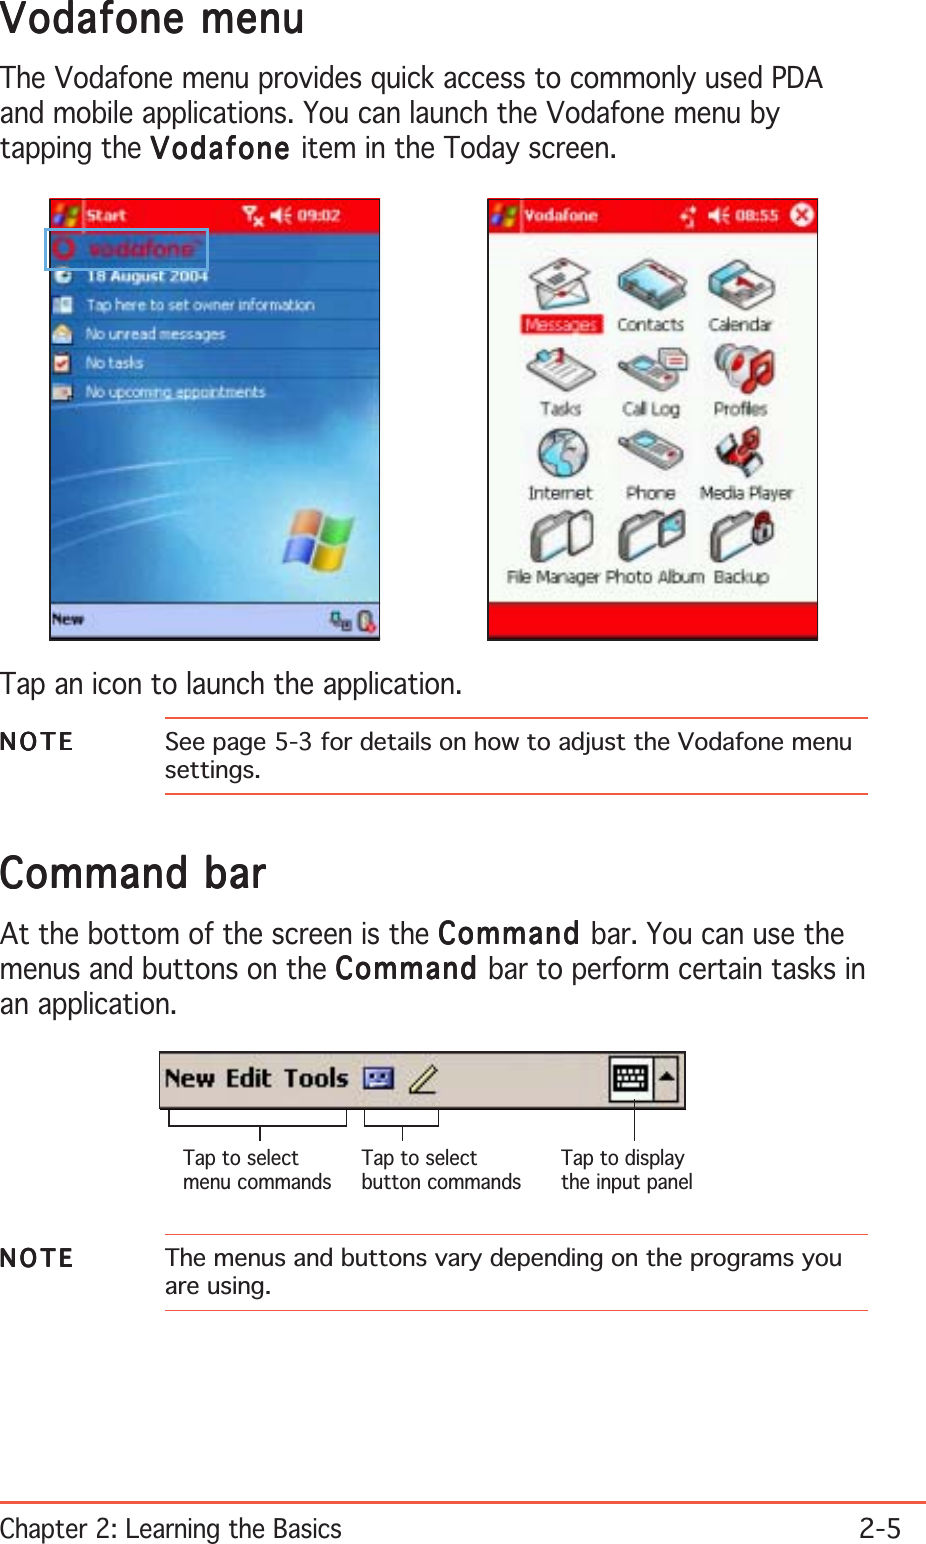 Chapter 2: Learning the Basics2-5Vodafone menuVodafone menuVodafone menuVodafone menuVodafone menuThe Vodafone menu provides quick access to commonly used PDAand mobile applications. You can launch the Vodafone menu bytapping the VodafoneVodafoneVodafoneVodafoneVodafone item in the Today screen.Tap an icon to launch the application.NOTENOTENOTENOTEN O T E See page 5-3 for details on how to adjust the Vodafone menusettings.Command barCommand barCommand barCommand barCommand barAt the bottom of the screen is the CommandCommandCommandCommandCommand bar. You can use themenus and buttons on the CommandCommandCommandCommandComma nd bar to perform certain tasks inan application.Tap to selectmenu commandsTap to selectbutton commandsTap to displaythe input panelNOTENOTENOTENOTEN O T E The menus and buttons vary depending on the programs youare using.